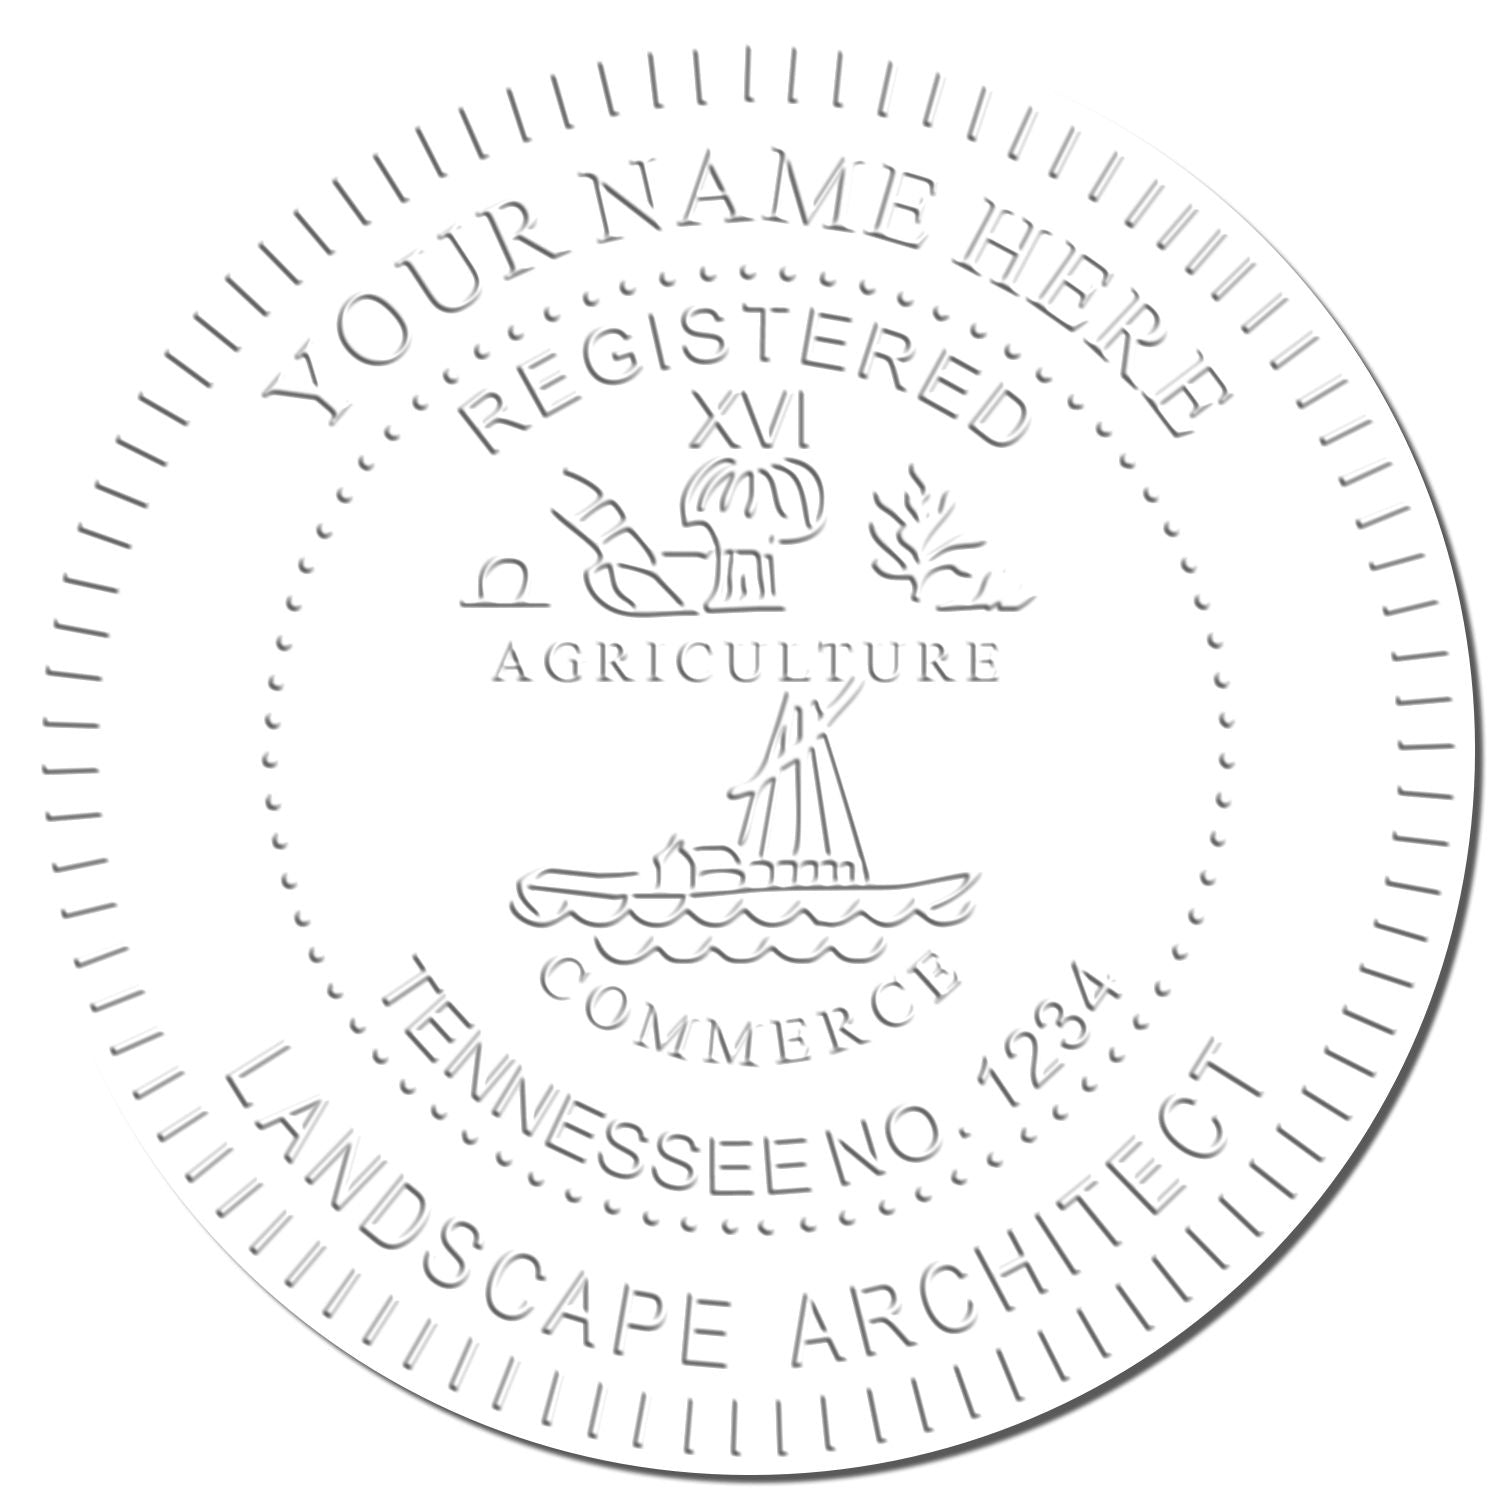 This paper is stamped with a sample imprint of the Gift Tennessee Landscape Architect Seal, signifying its quality and reliability.